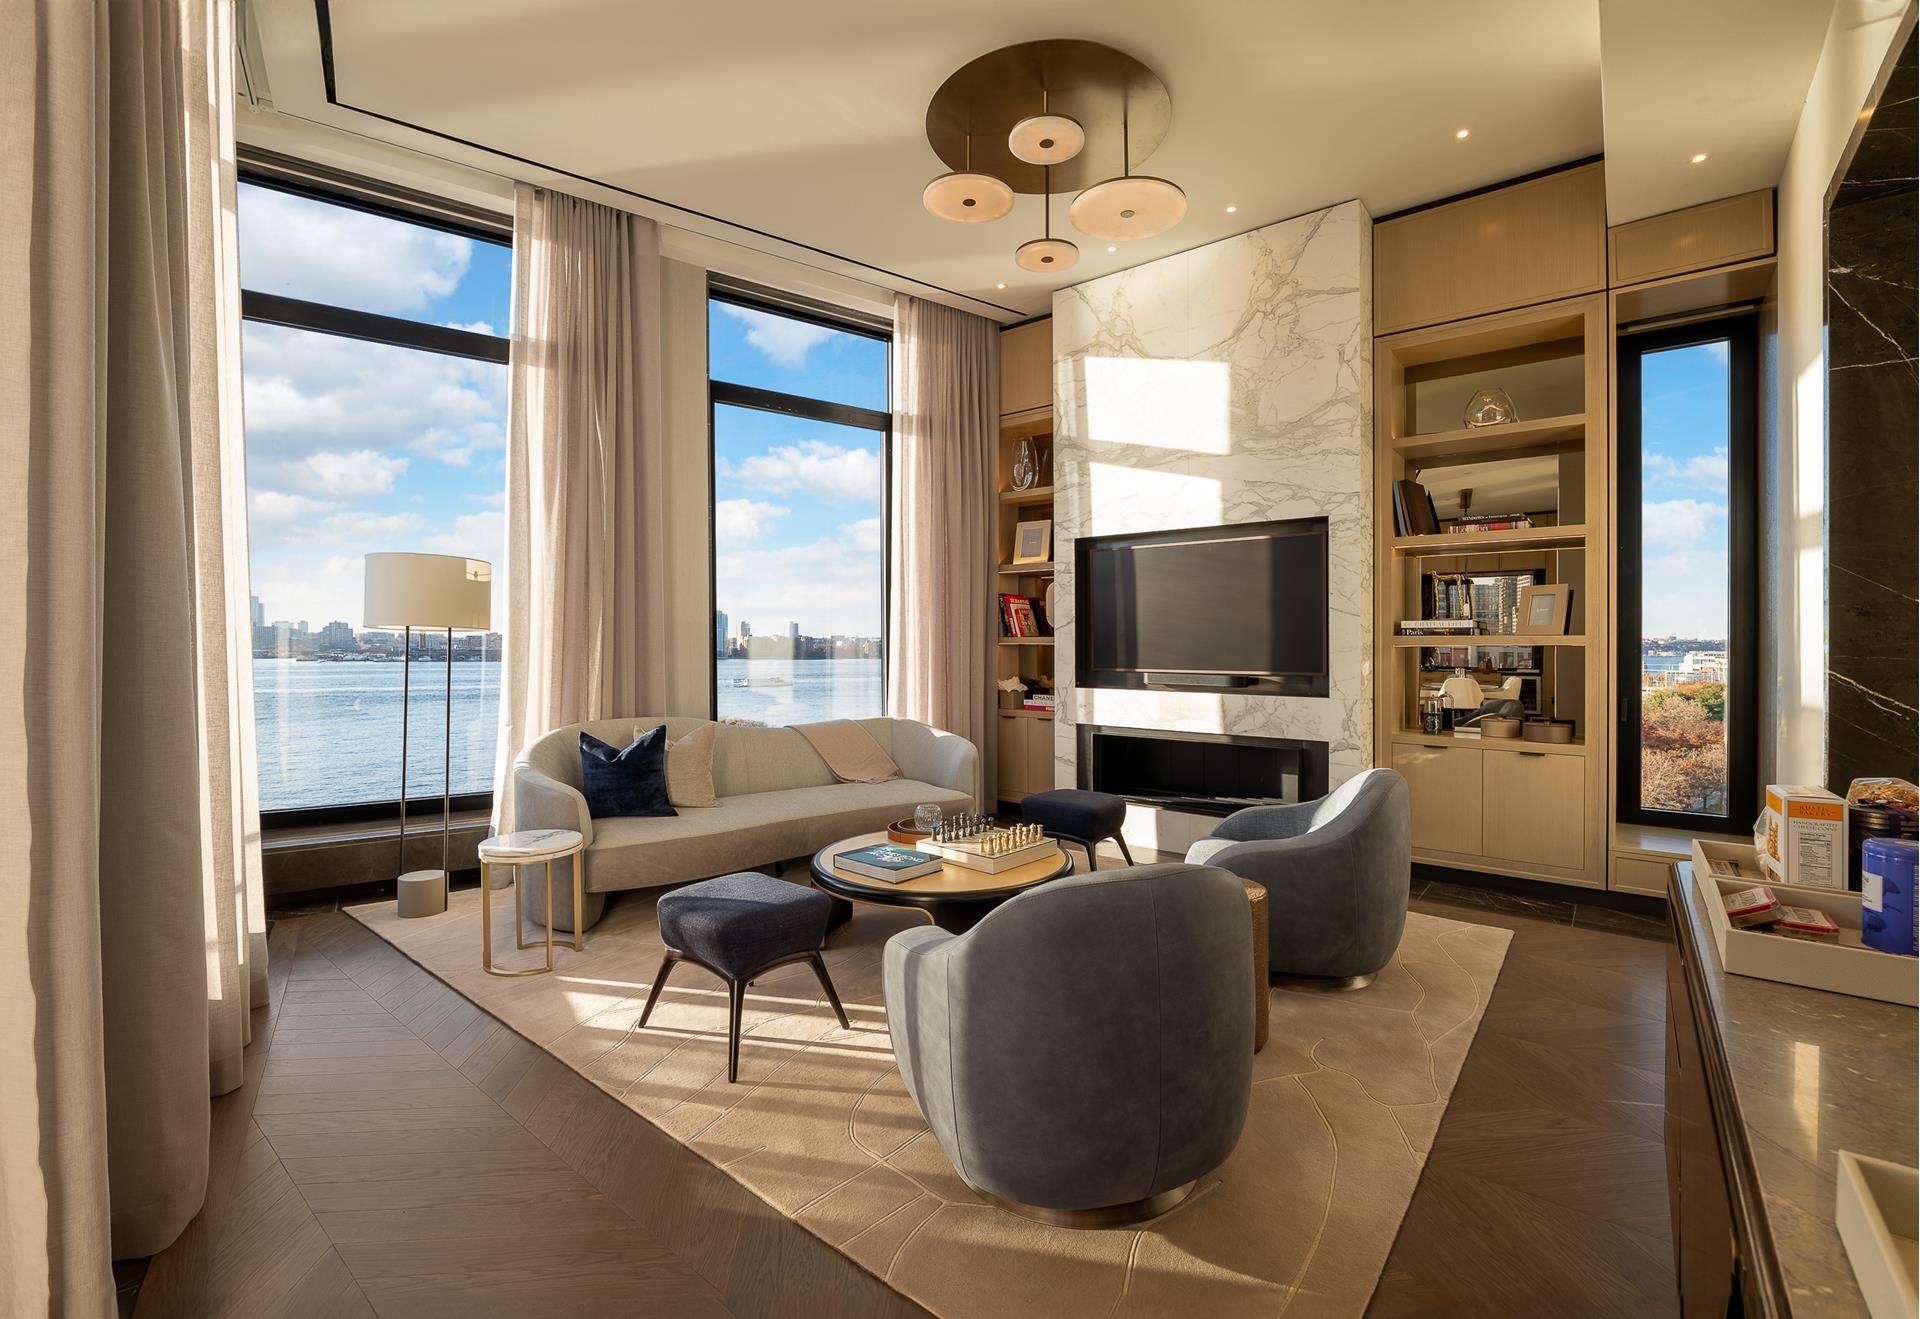 Crown Jewel Hotel Penthouse on West Village Waterfront Introducing the extraordinary turnkey Penthouse and the singular condominium available for purchase atop Maison Hudson, downtown's newest and most exclusive hotel particulier ...